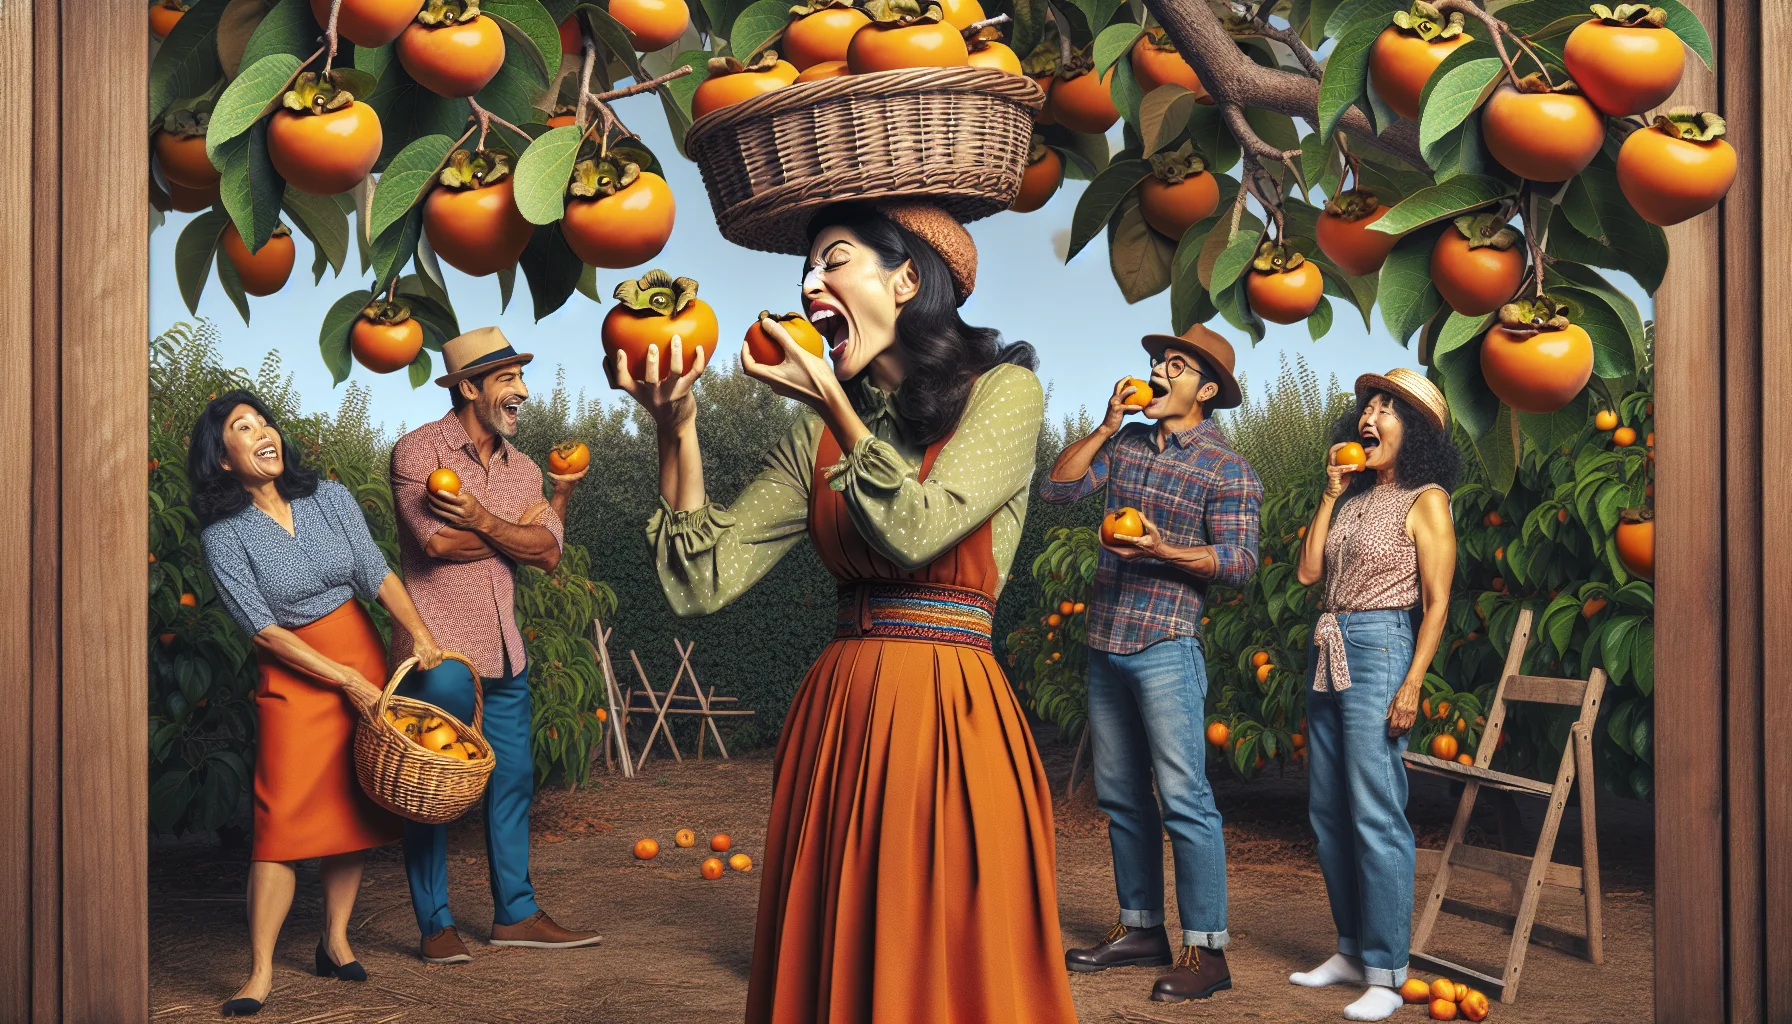 Create a realistic image illustrating an amusing scenario pertaining to persimmon consumption. Display an Hispanic woman snappily dressed in gardening attire, picking a ripe persimmon from a tree in her lush, back-yard orchard. She's trying whimsically to balance a large fruit-filled basket on her head while biting into an already-picked persimmon, with juice playfully trickling down her chin. Also depict a small group of diverse onlookers - a South Asian man, a Caucasian woman, and a Black child, all dressed casually and laughing at her antics. This scenario should inspire a passion for gardening and the enjoyment of fresh fruits.